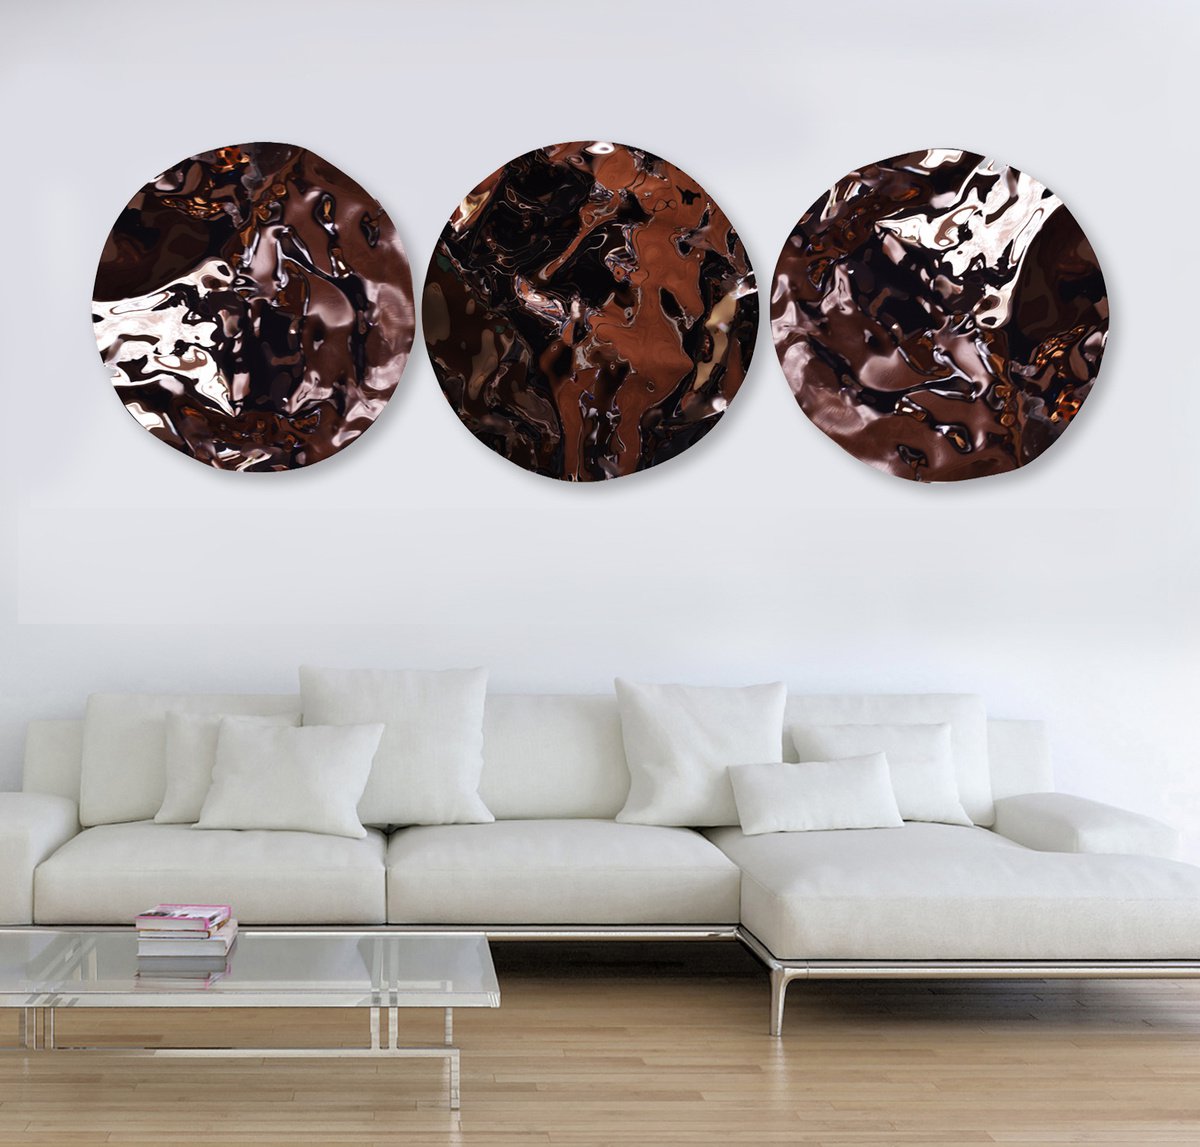 Game of lights in Brown / Triptych Unique Sculptural Large 3-Dimensional Contemporary Abst... by Anna Sidi-Yacoub